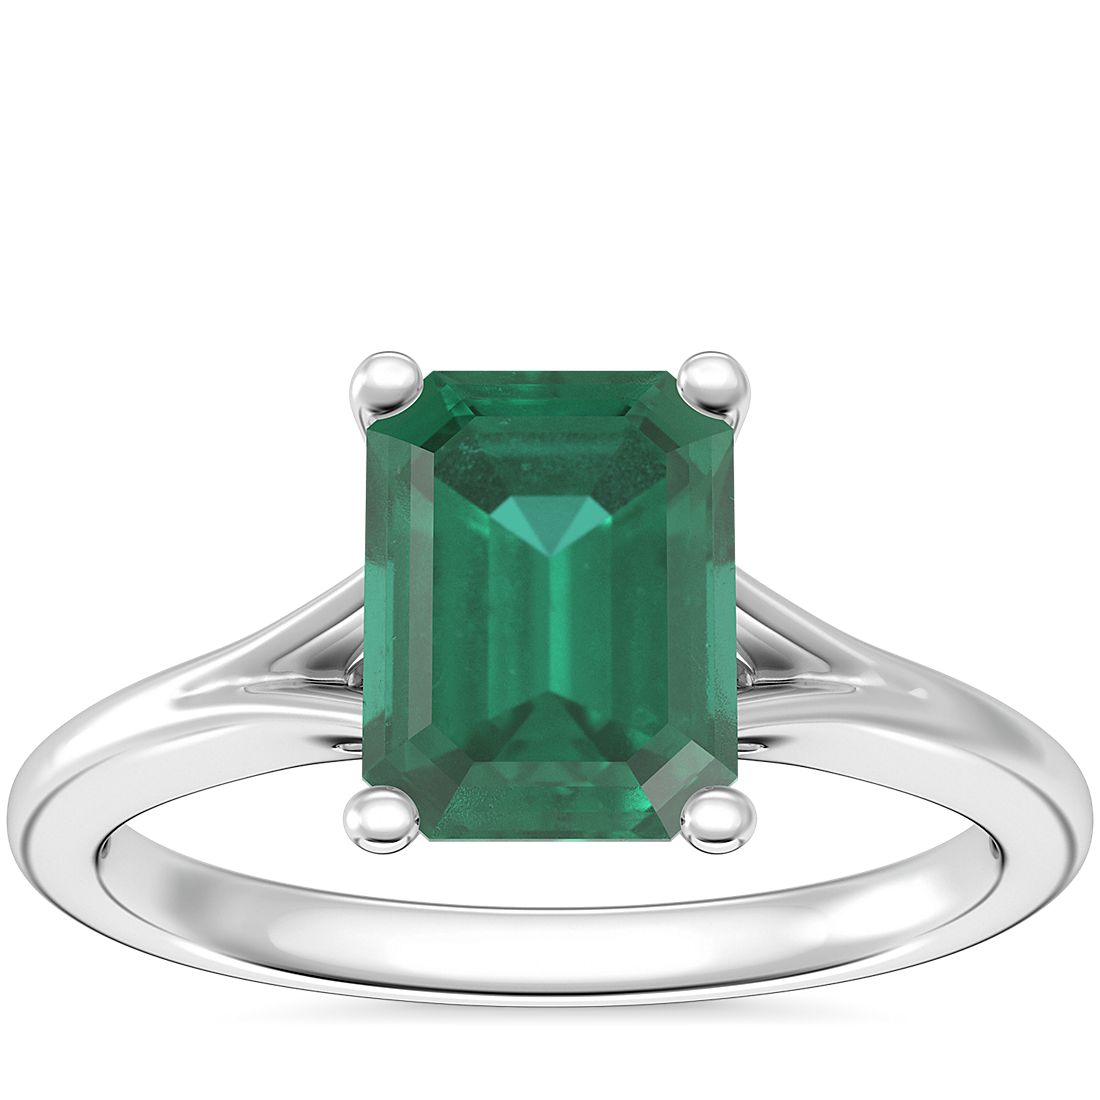 Petite Split Shank Solitaire Engagement Ring with Emerald-Cut Emerald in Platinum (8x6mm)